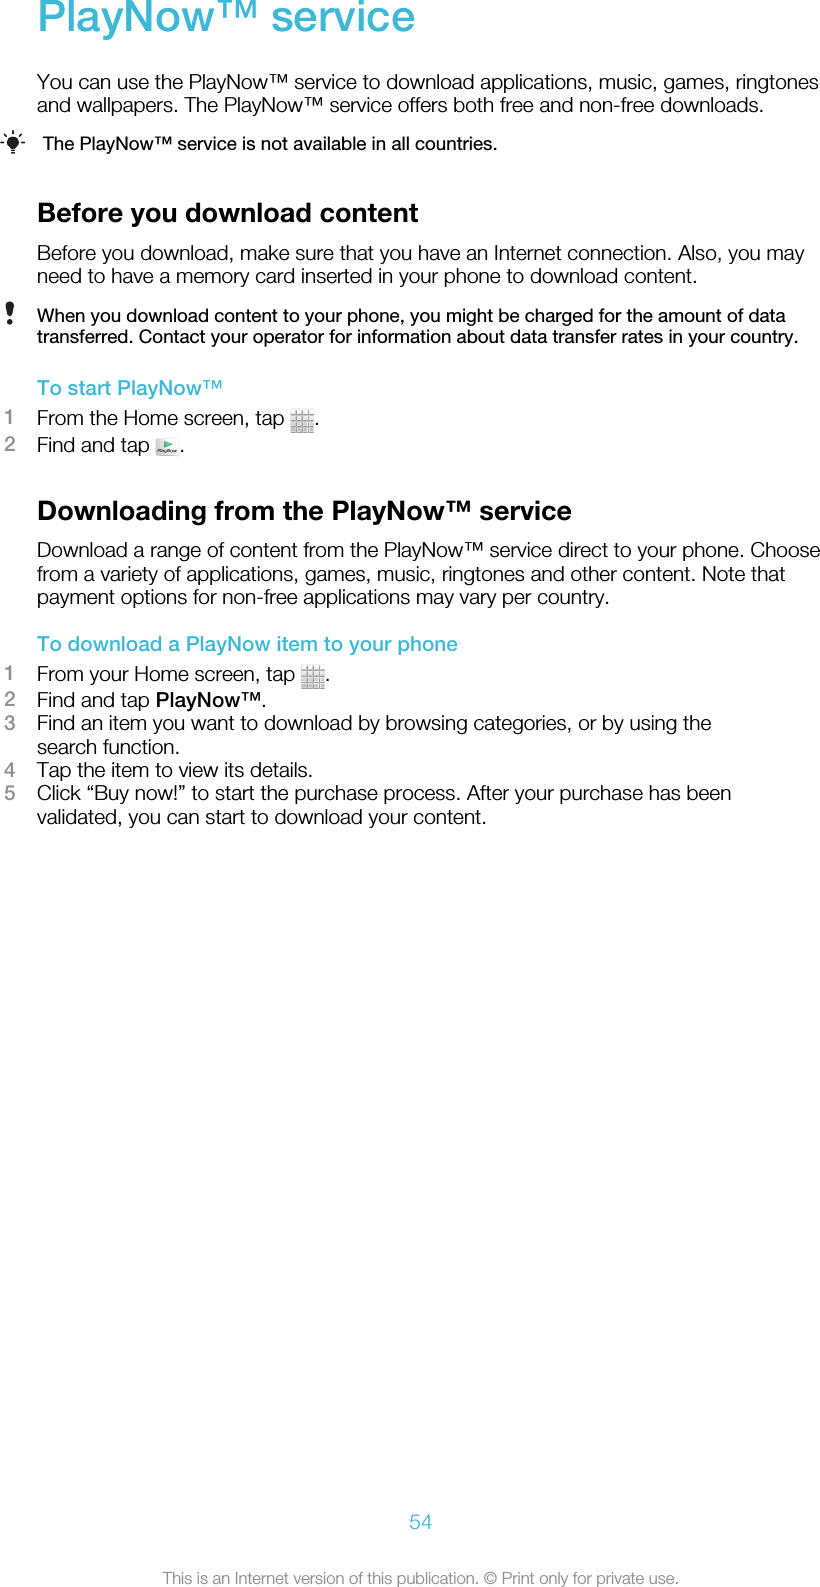 PlayNow™ serviceYou can use the PlayNow™ service to download applications, music, games, ringtonesand wallpapers. The PlayNow™ service offers both free and non-free downloads.The PlayNow™ service is not available in all countries.Before you download contentBefore you download, make sure that you have an Internet connection. Also, you mayneed to have a memory card inserted in your phone to download content.When you download content to your phone, you might be charged for the amount of datatransferred. Contact your operator for information about data transfer rates in your country.To start PlayNow™1From the Home screen, tap  .2Find and tap  .Downloading from the PlayNow™ serviceDownload a range of content from the PlayNow™ service direct to your phone. Choosefrom a variety of applications, games, music, ringtones and other content. Note thatpayment options for non-free applications may vary per country.To download a PlayNow item to your phone1From your Home screen, tap  .2Find and tap PlayNow™.3Find an item you want to download by browsing categories, or by using thesearch function.4Tap the item to view its details.5Click “Buy now!” to start the purchase process. After your purchase has beenvalidated, you can start to download your content.54This is an Internet version of this publication. © Print only for private use.